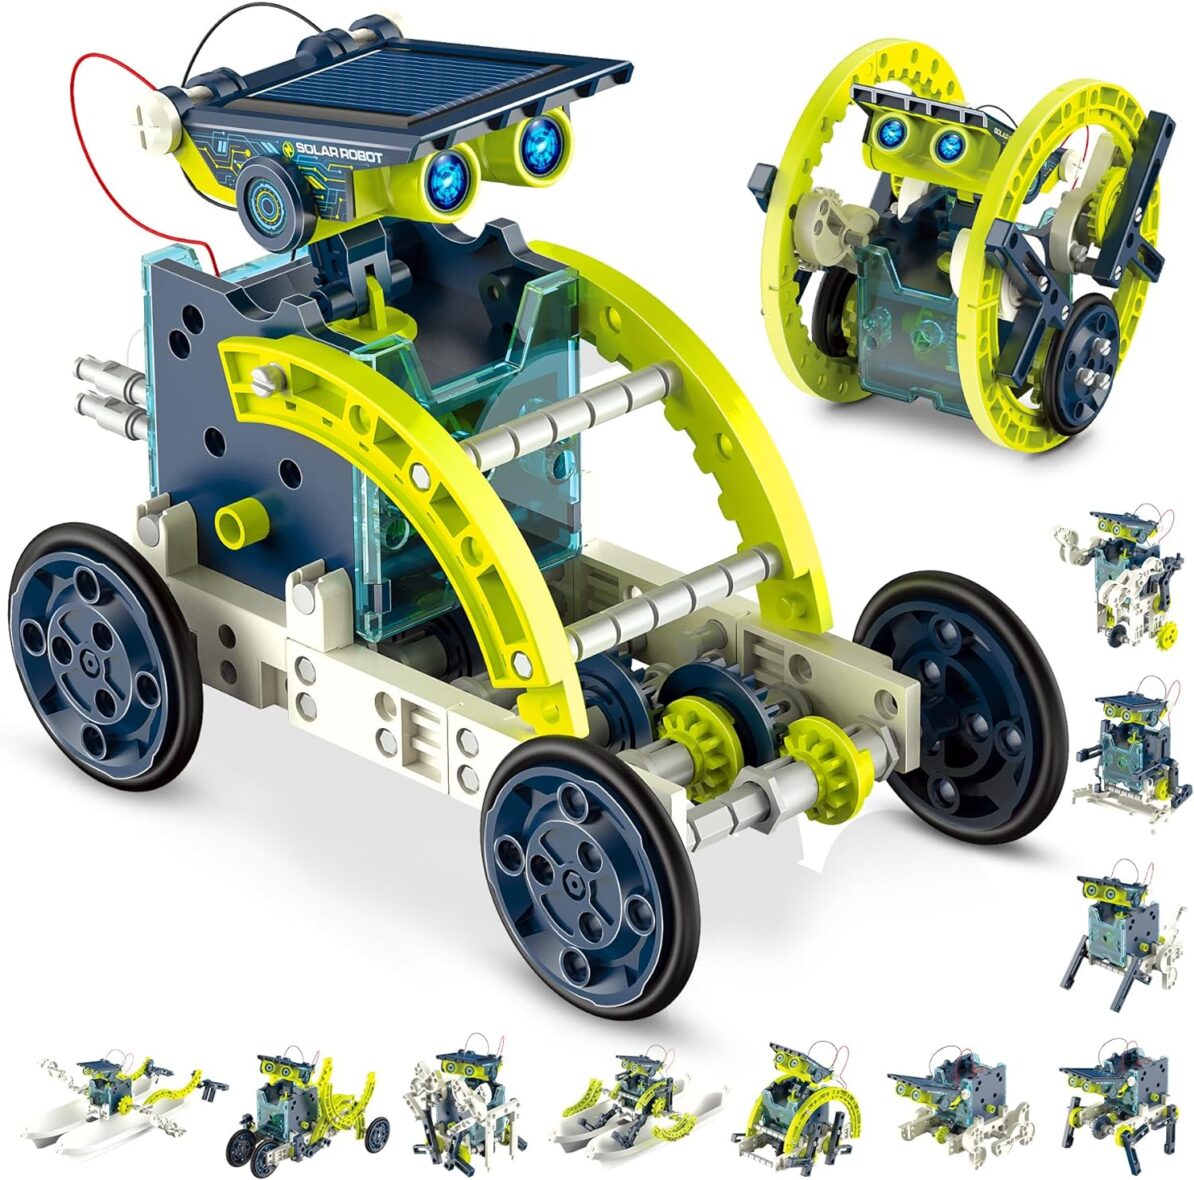 Hot Bee 12-in-1 STEM Solar Robot Kit – STEM Projects for Kids Ages 8-12, Learning Educational Science Kits, DIY Building Toys,